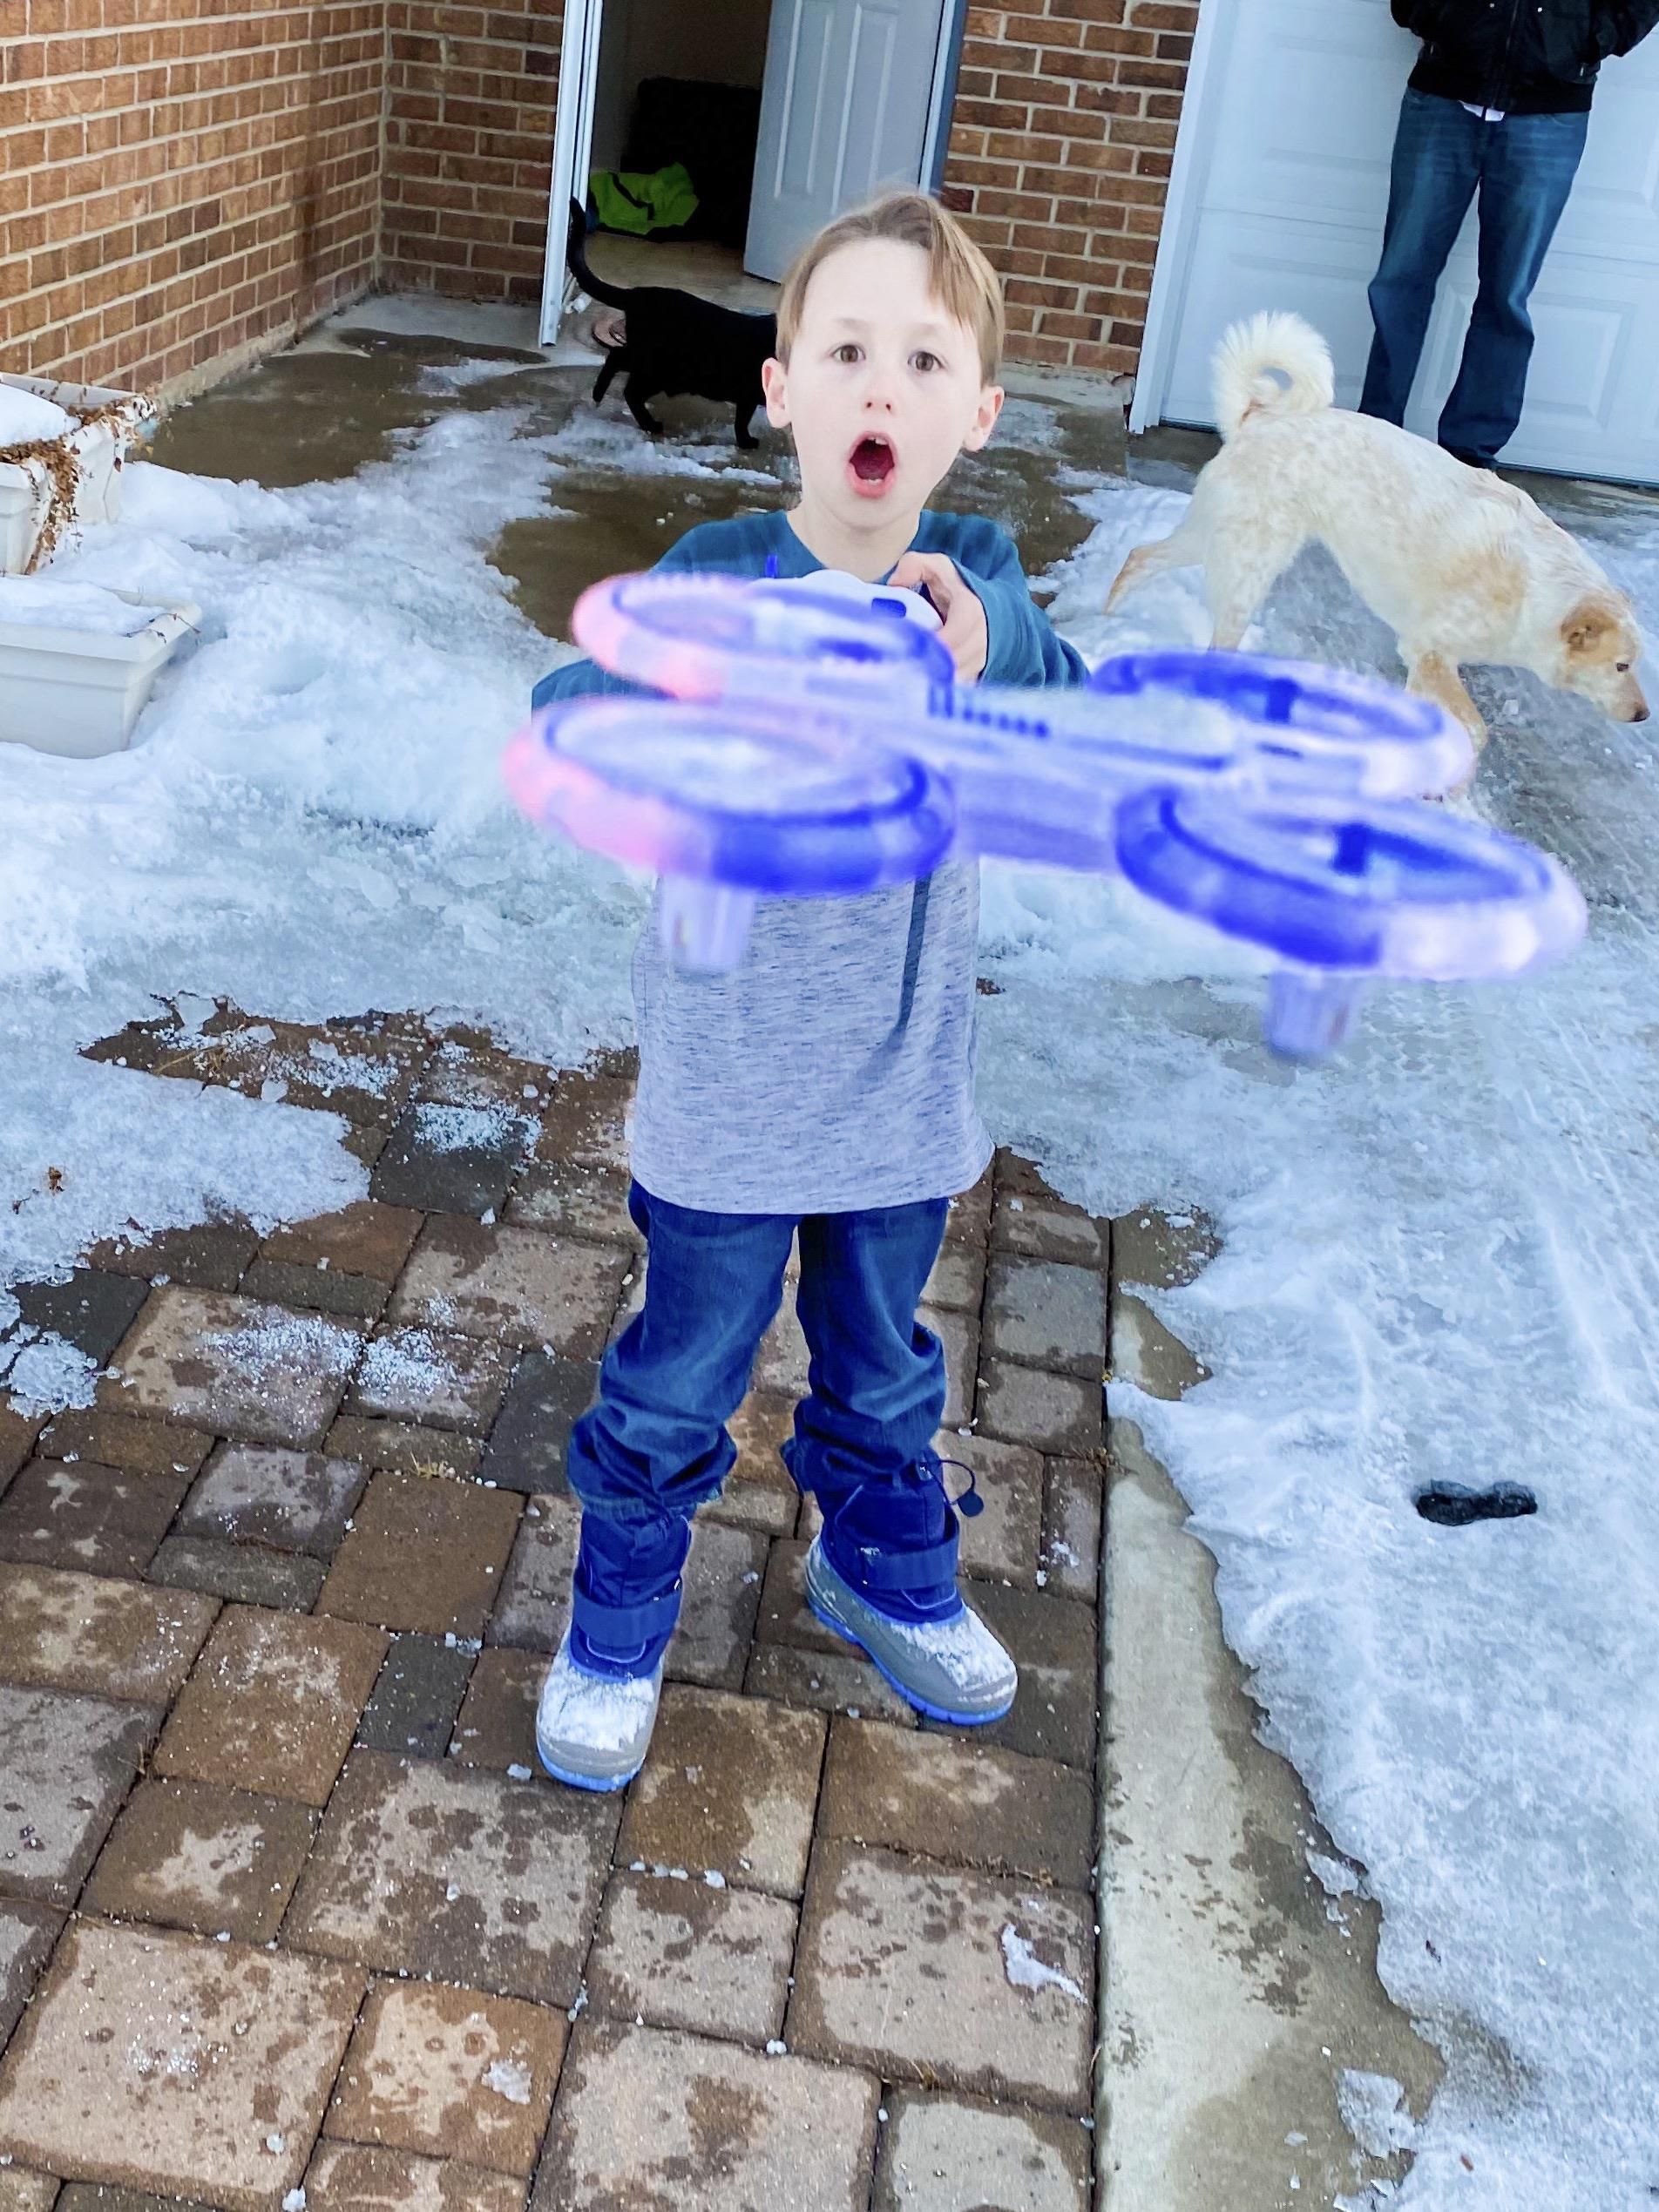 The moment before I was hit with my son’s new drone.